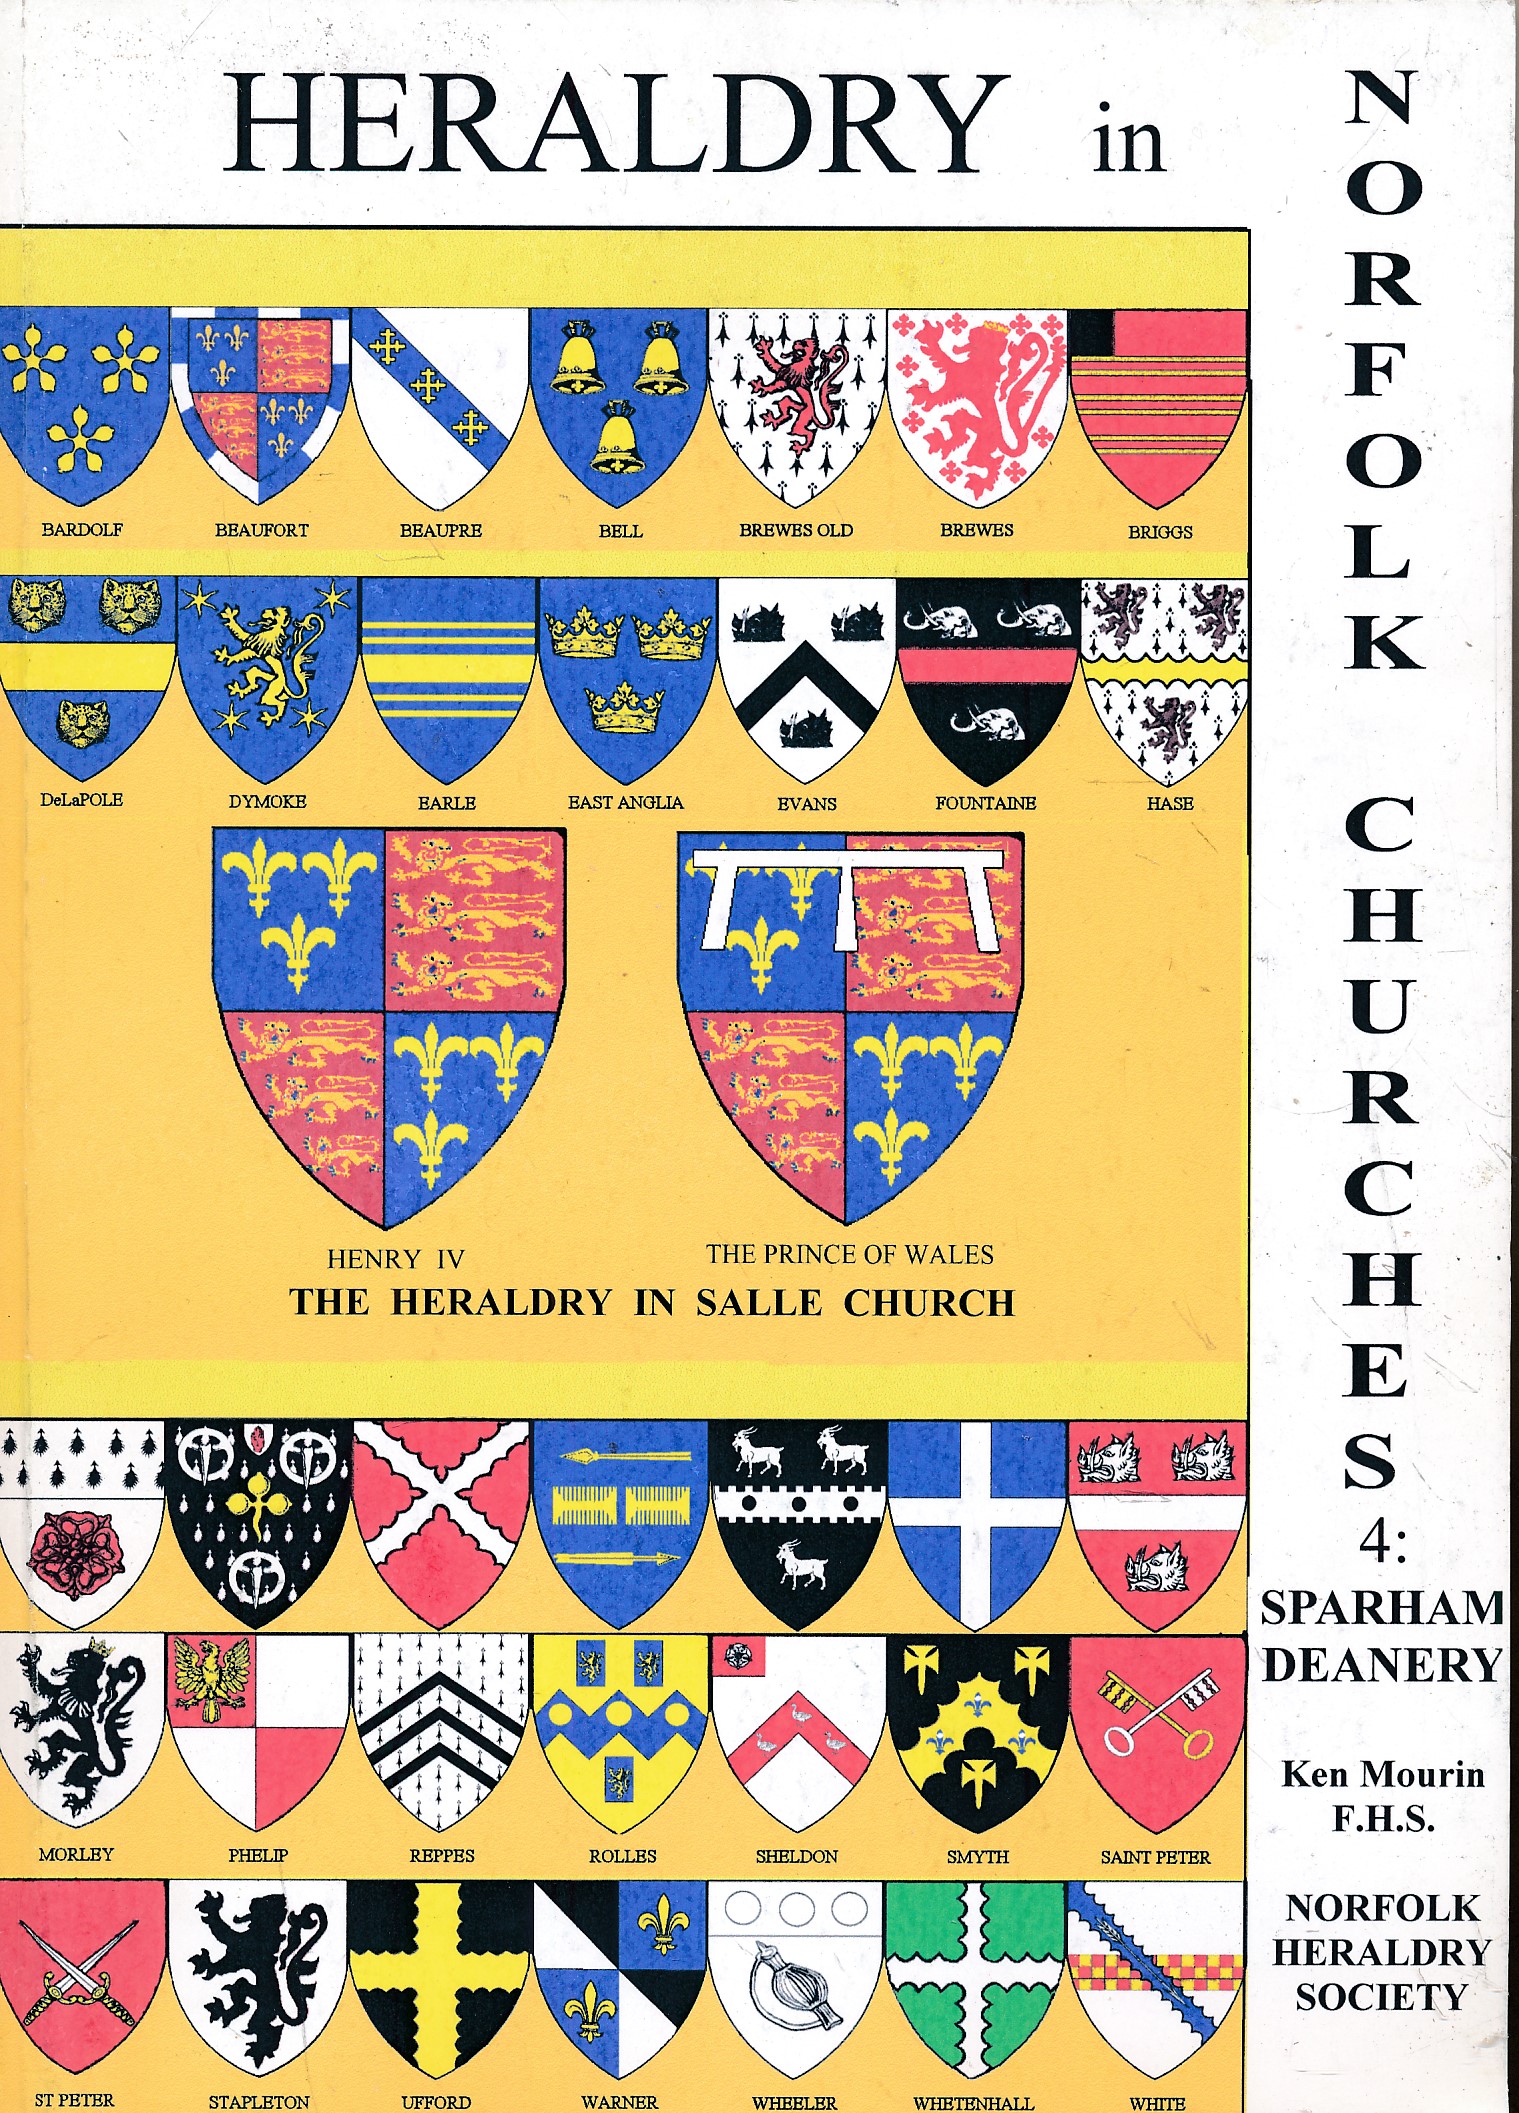 Heraldry in Norfolk Churches. Volume 4. Sparham Deanery. Including Heraldry found in three country houses.....